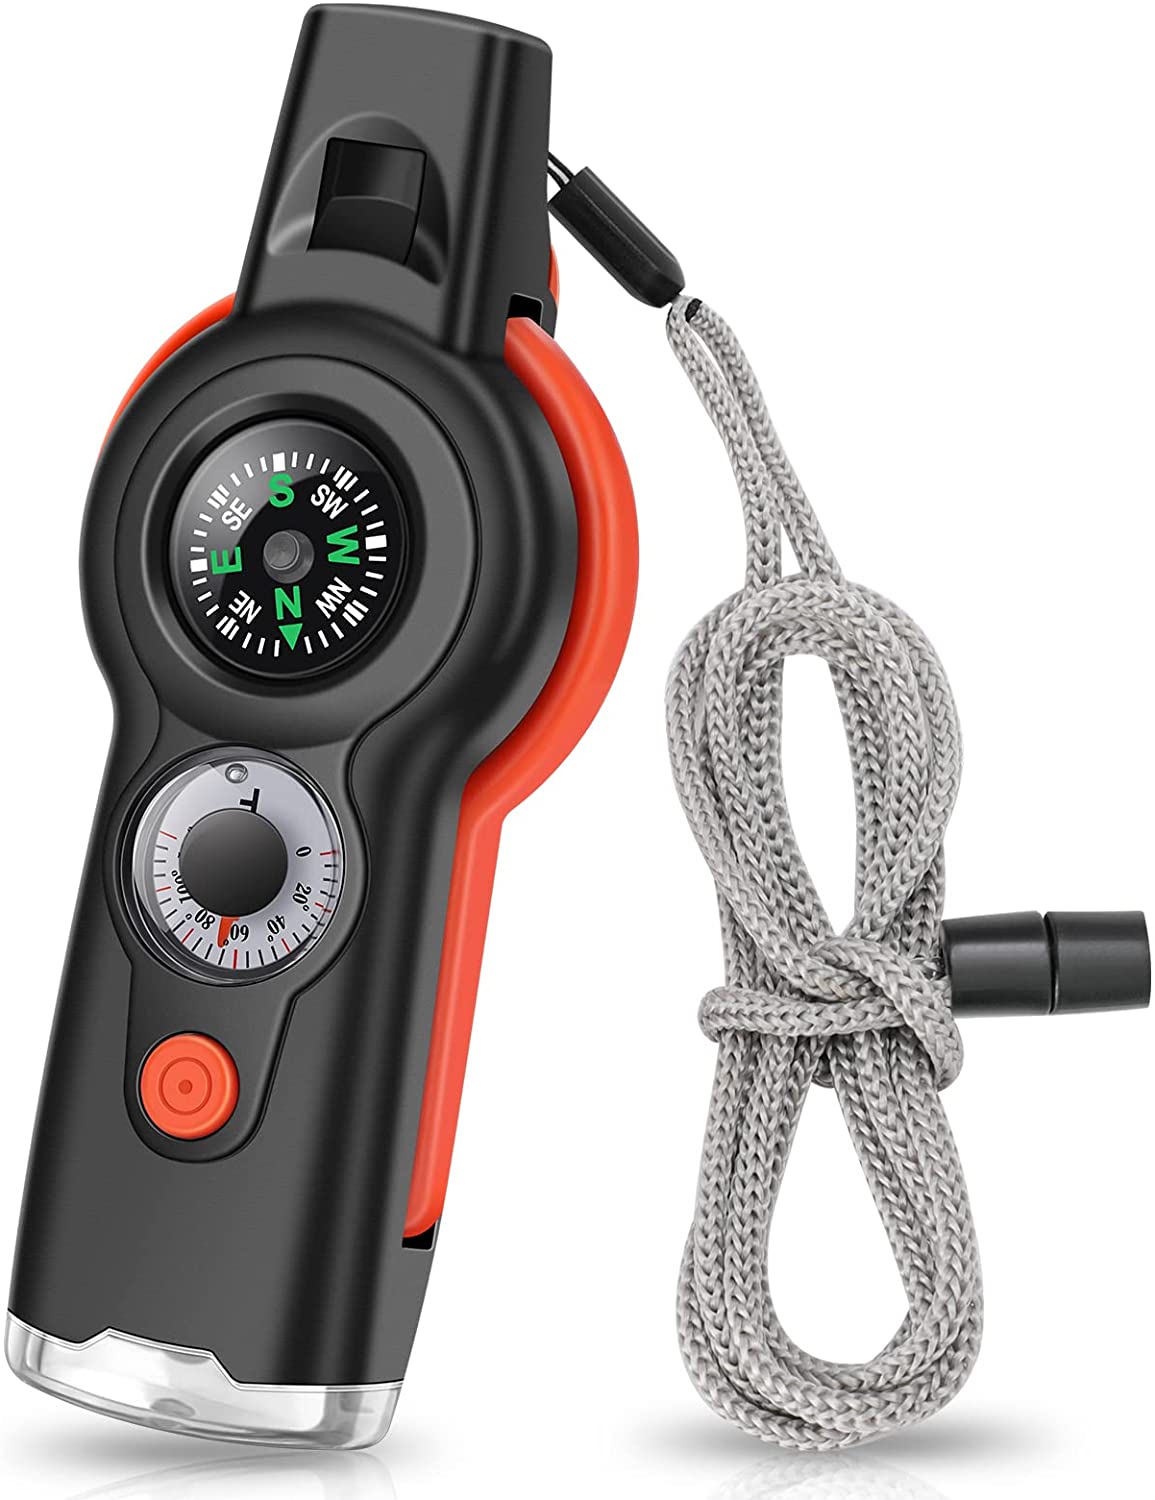 7-in-1 Emergency Survival Function Whistle, Outdoor Multifunctional Tool Safety Whistle with Lanyard, Ideal for Kayaking, Boating, Hiking, Camping, Climbing, Hunting, Fishing, Rescue Signaling